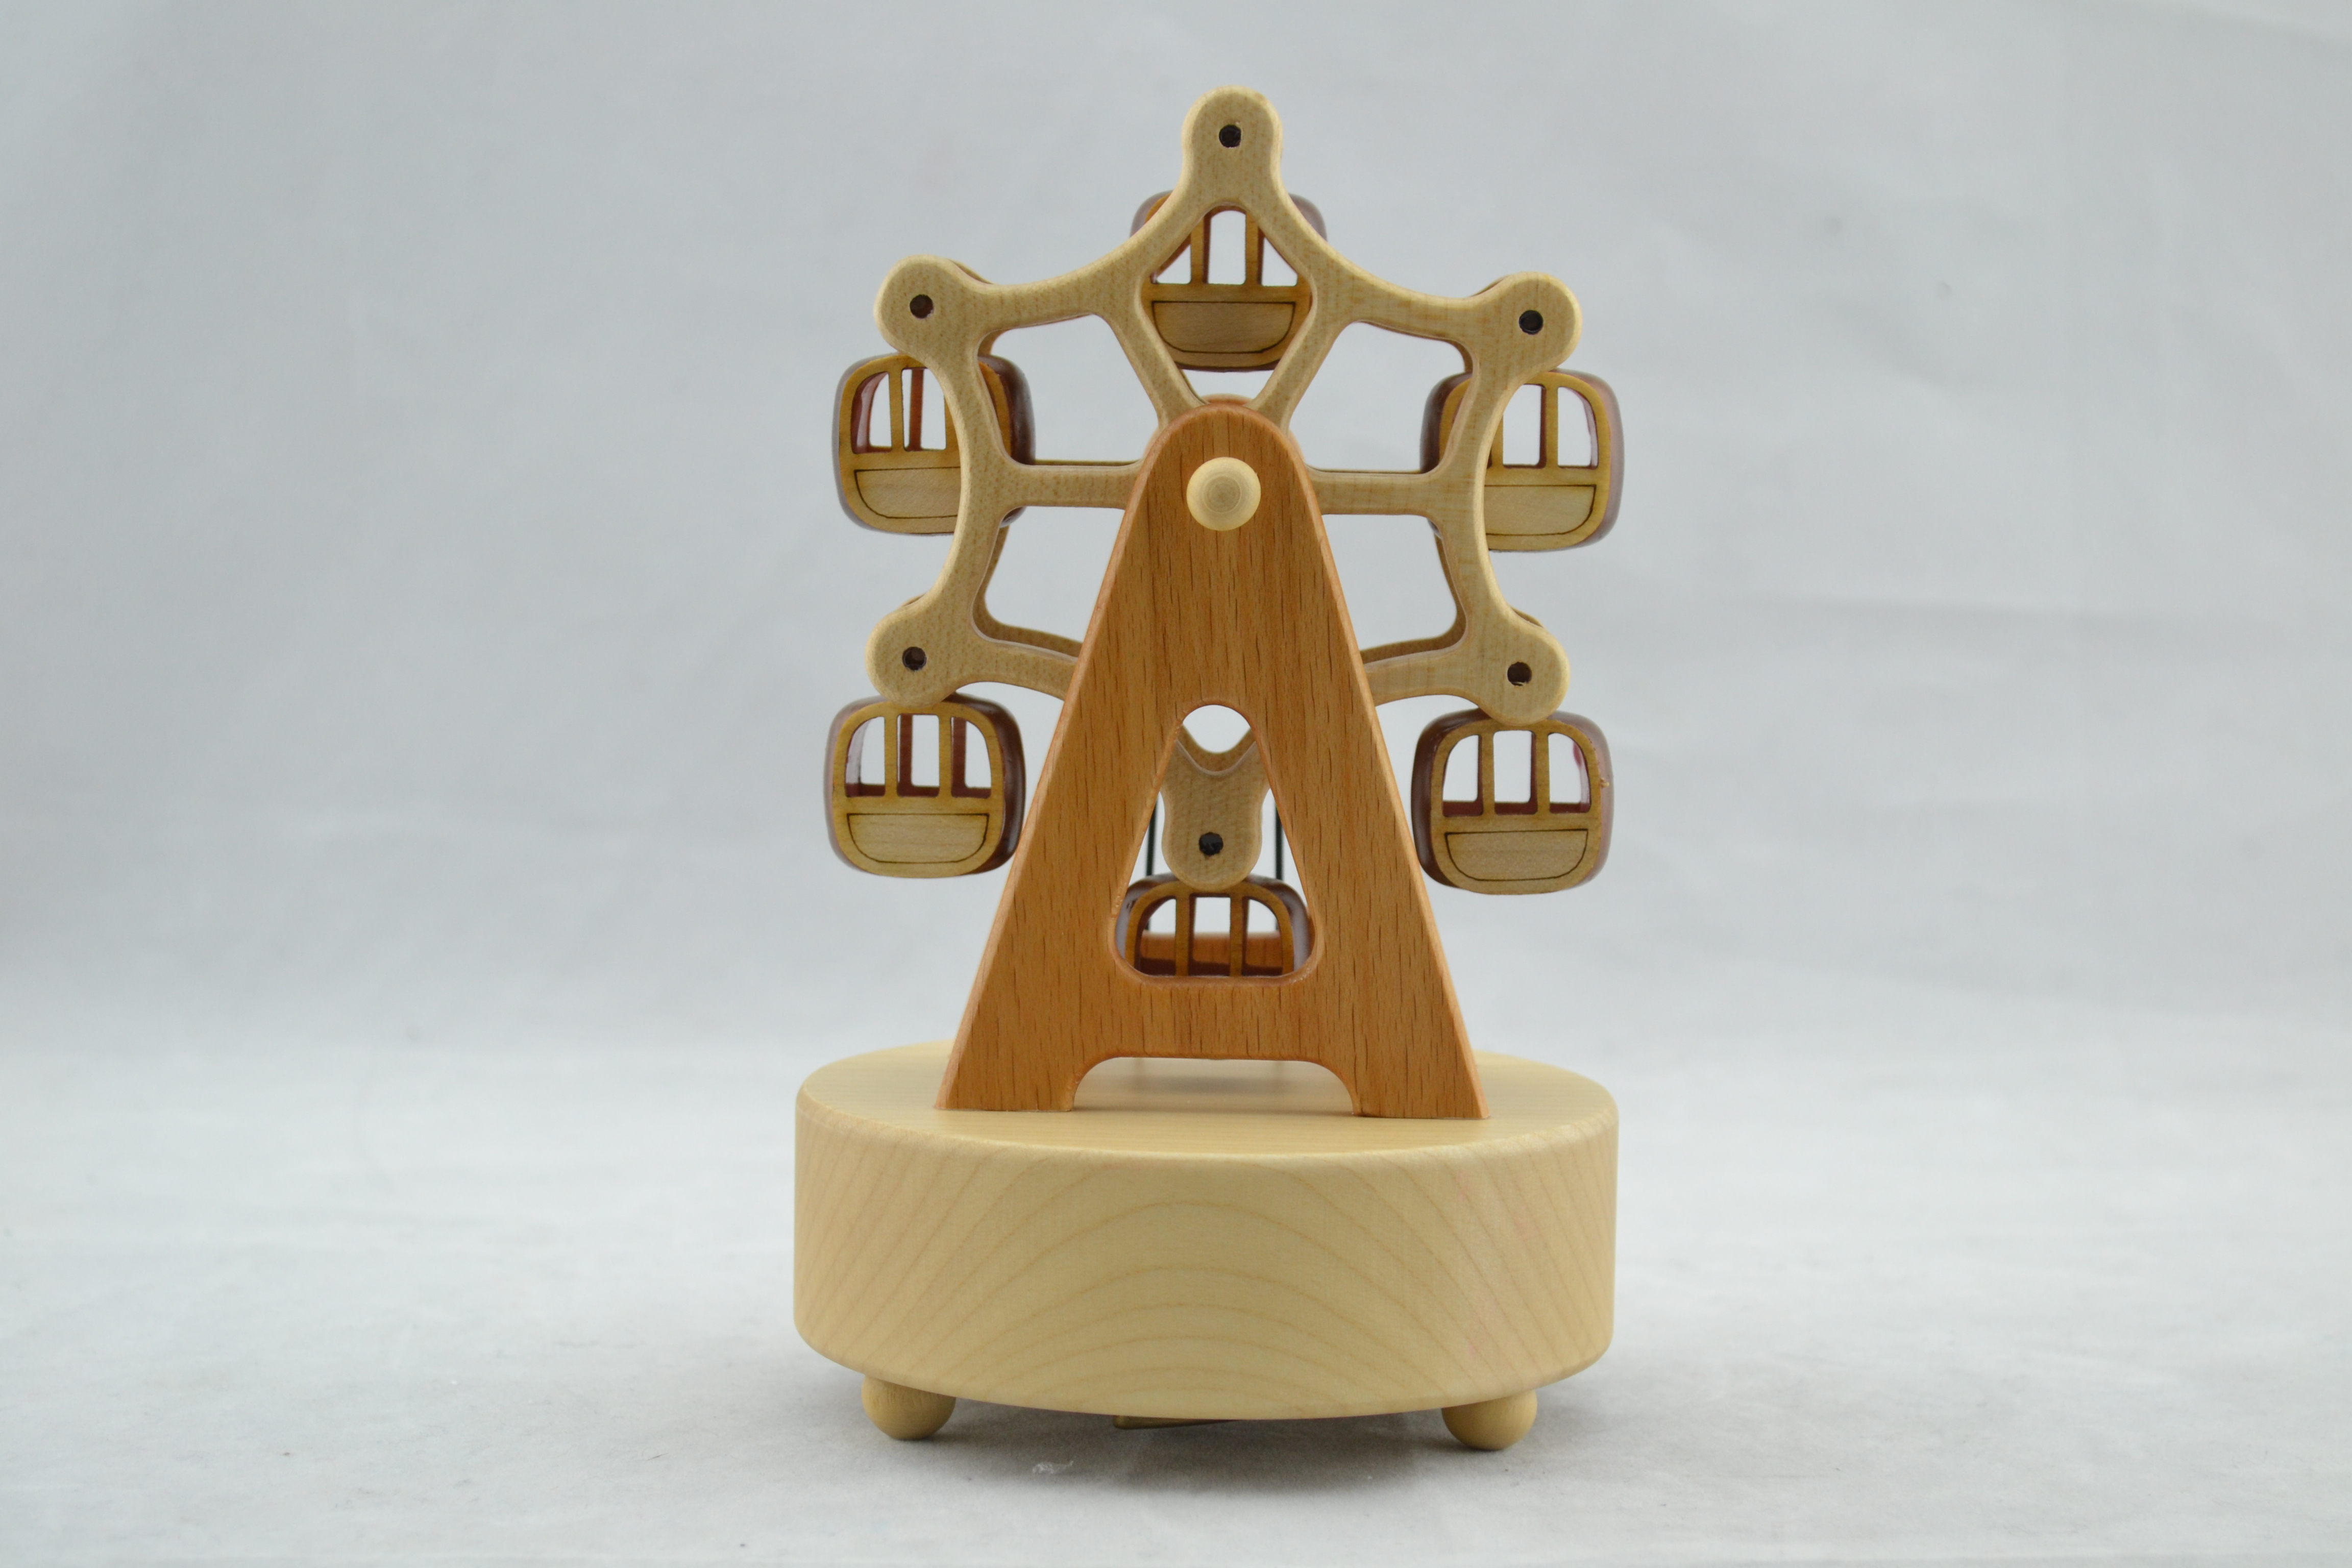 Yunsheng musical movement with custom music Xmas gifts music box wood (Y18FWM01) Featured Image